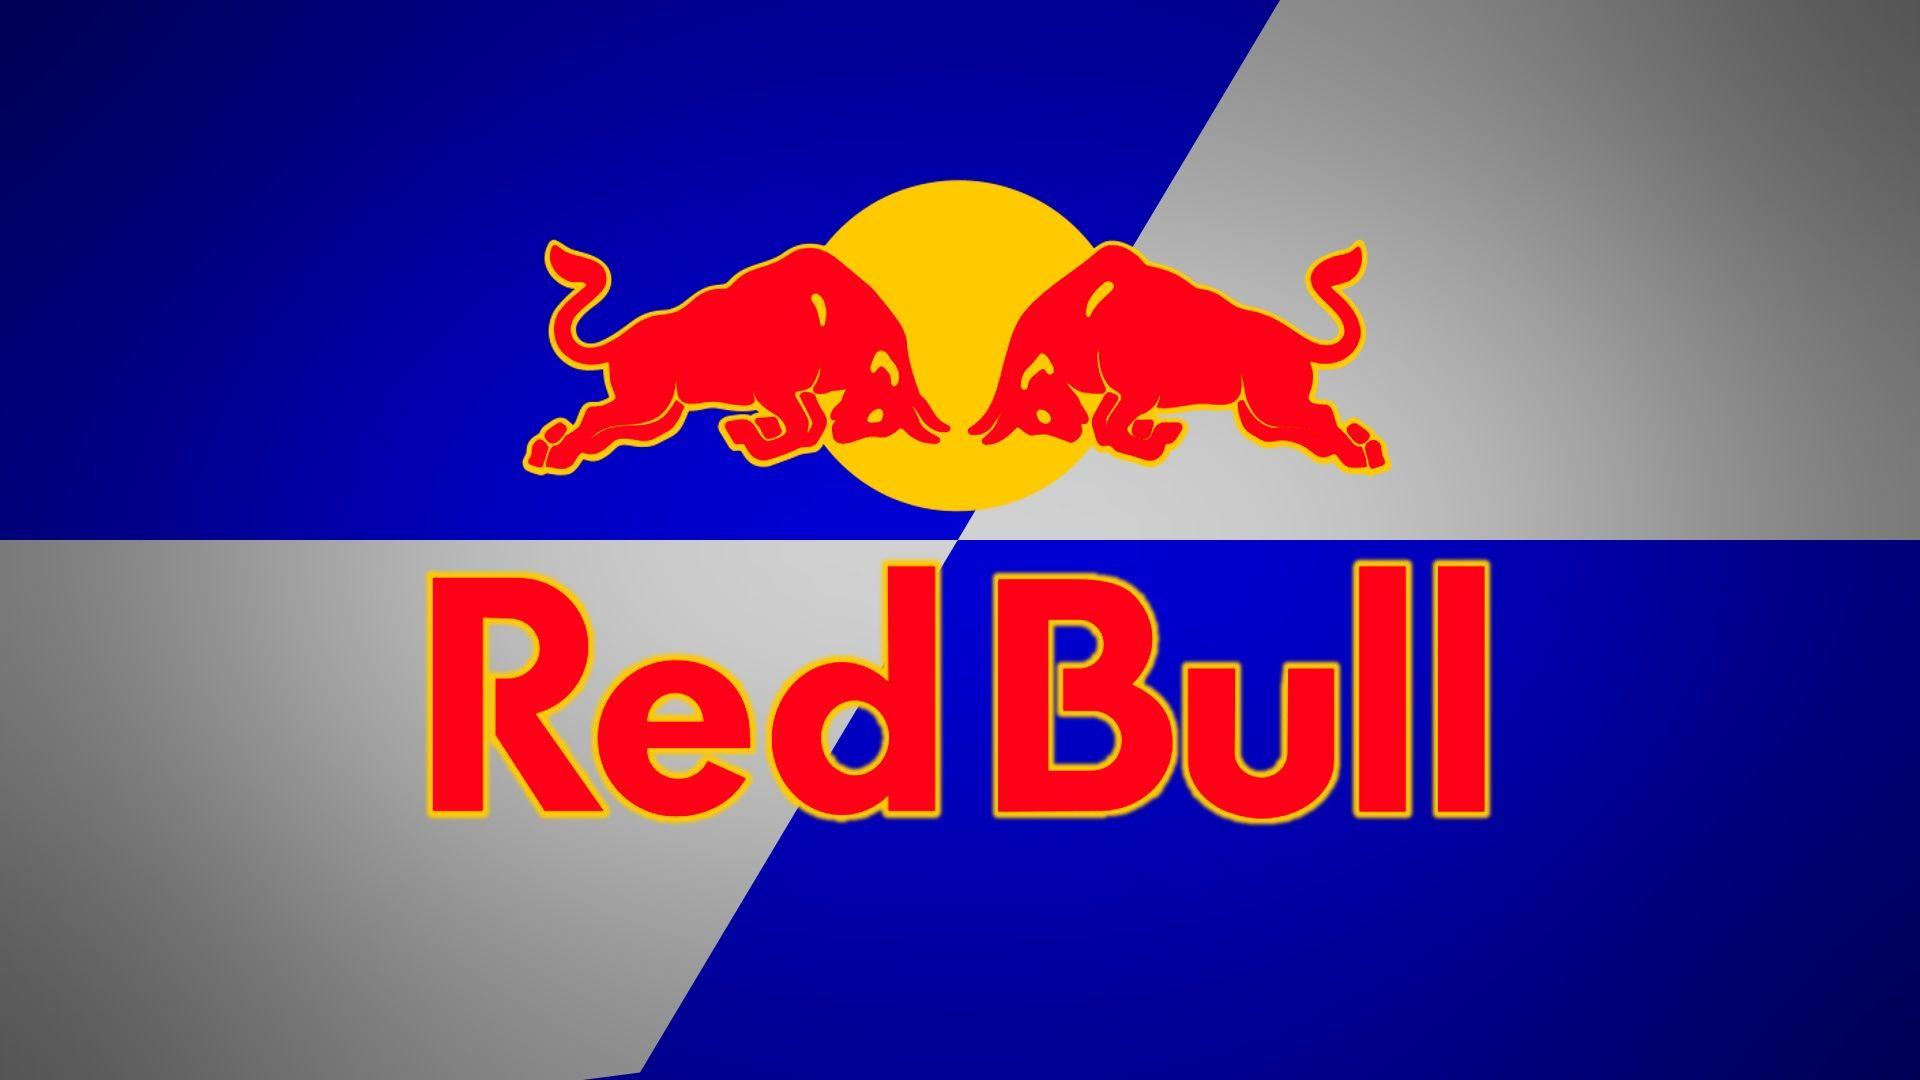 Red Bull Energy Drink Logo - The Dangers Of Energy Drinks. SiOWfa16: Science in Our World